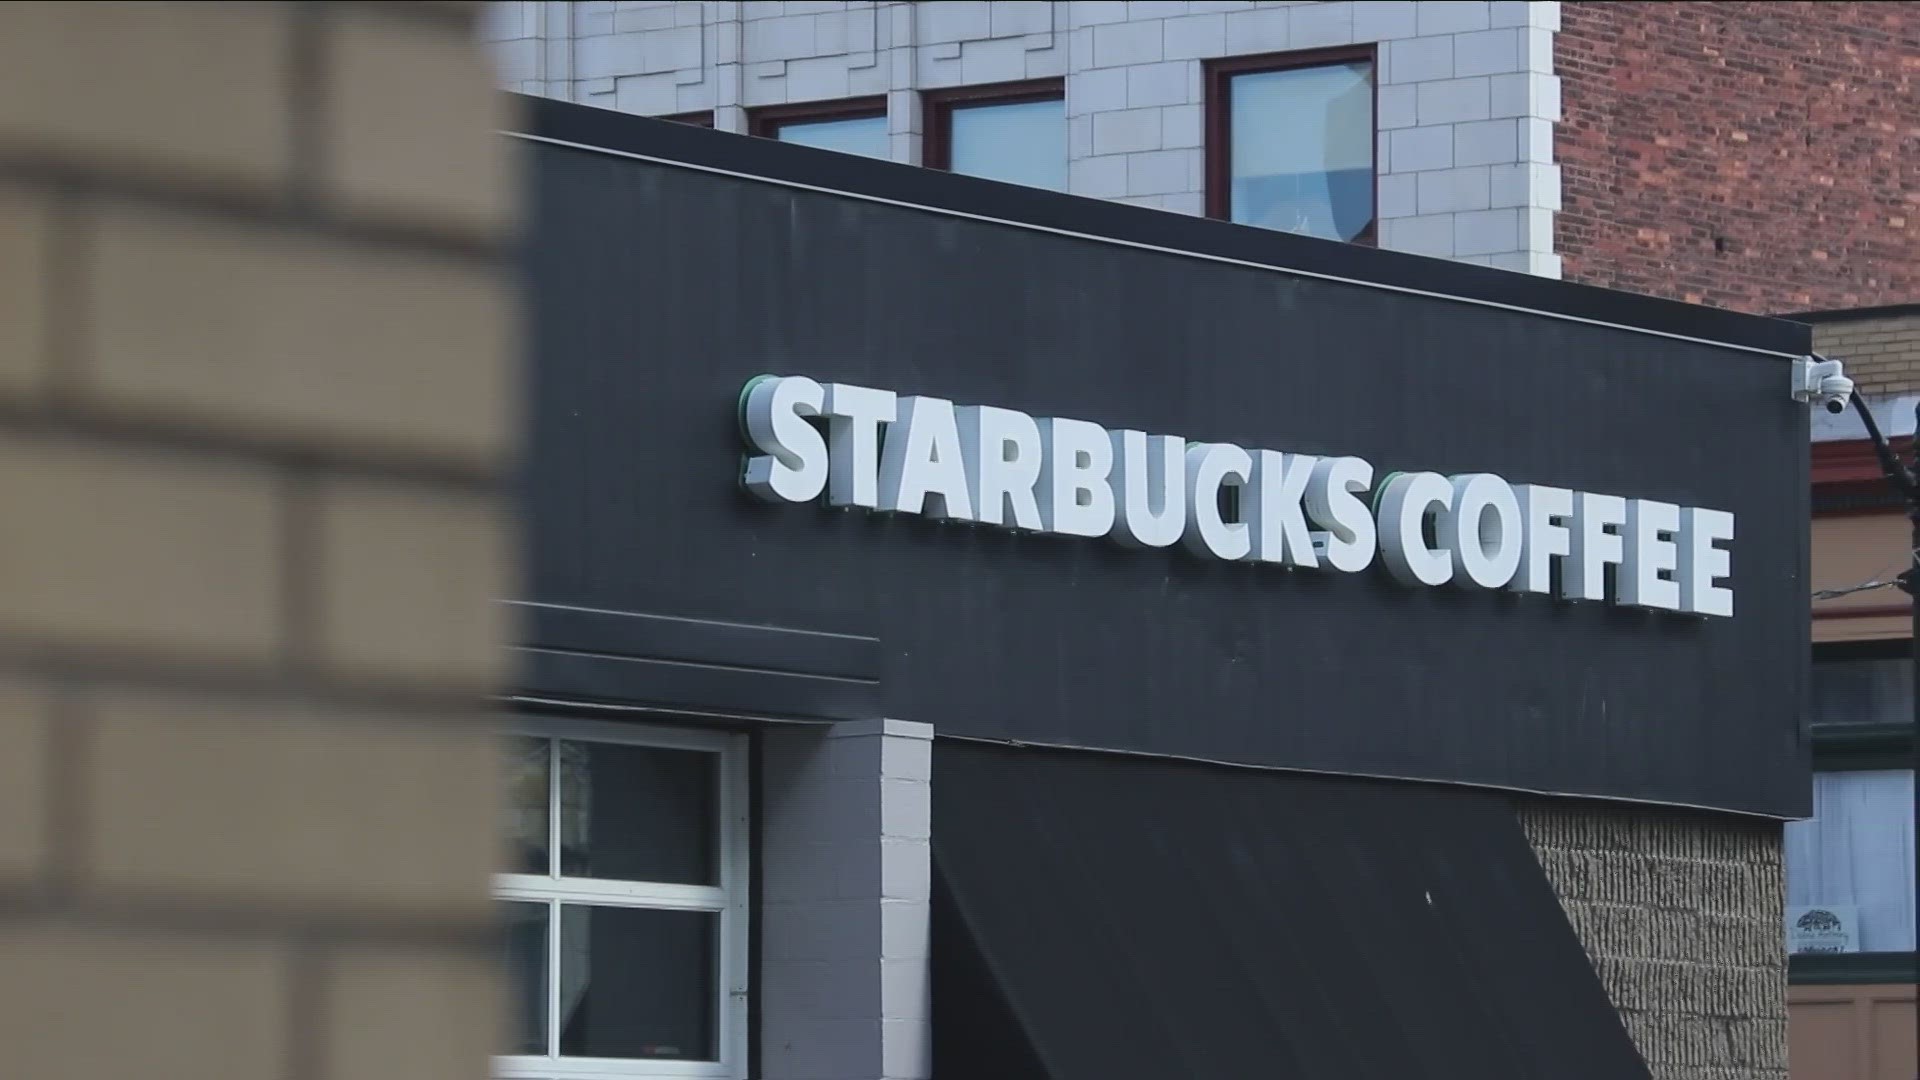 An employee at the Starbucks on the corner of Delaware and Chippewa in Buffalo filed a petition to decertify the union. Labor experts call it "standard practice."